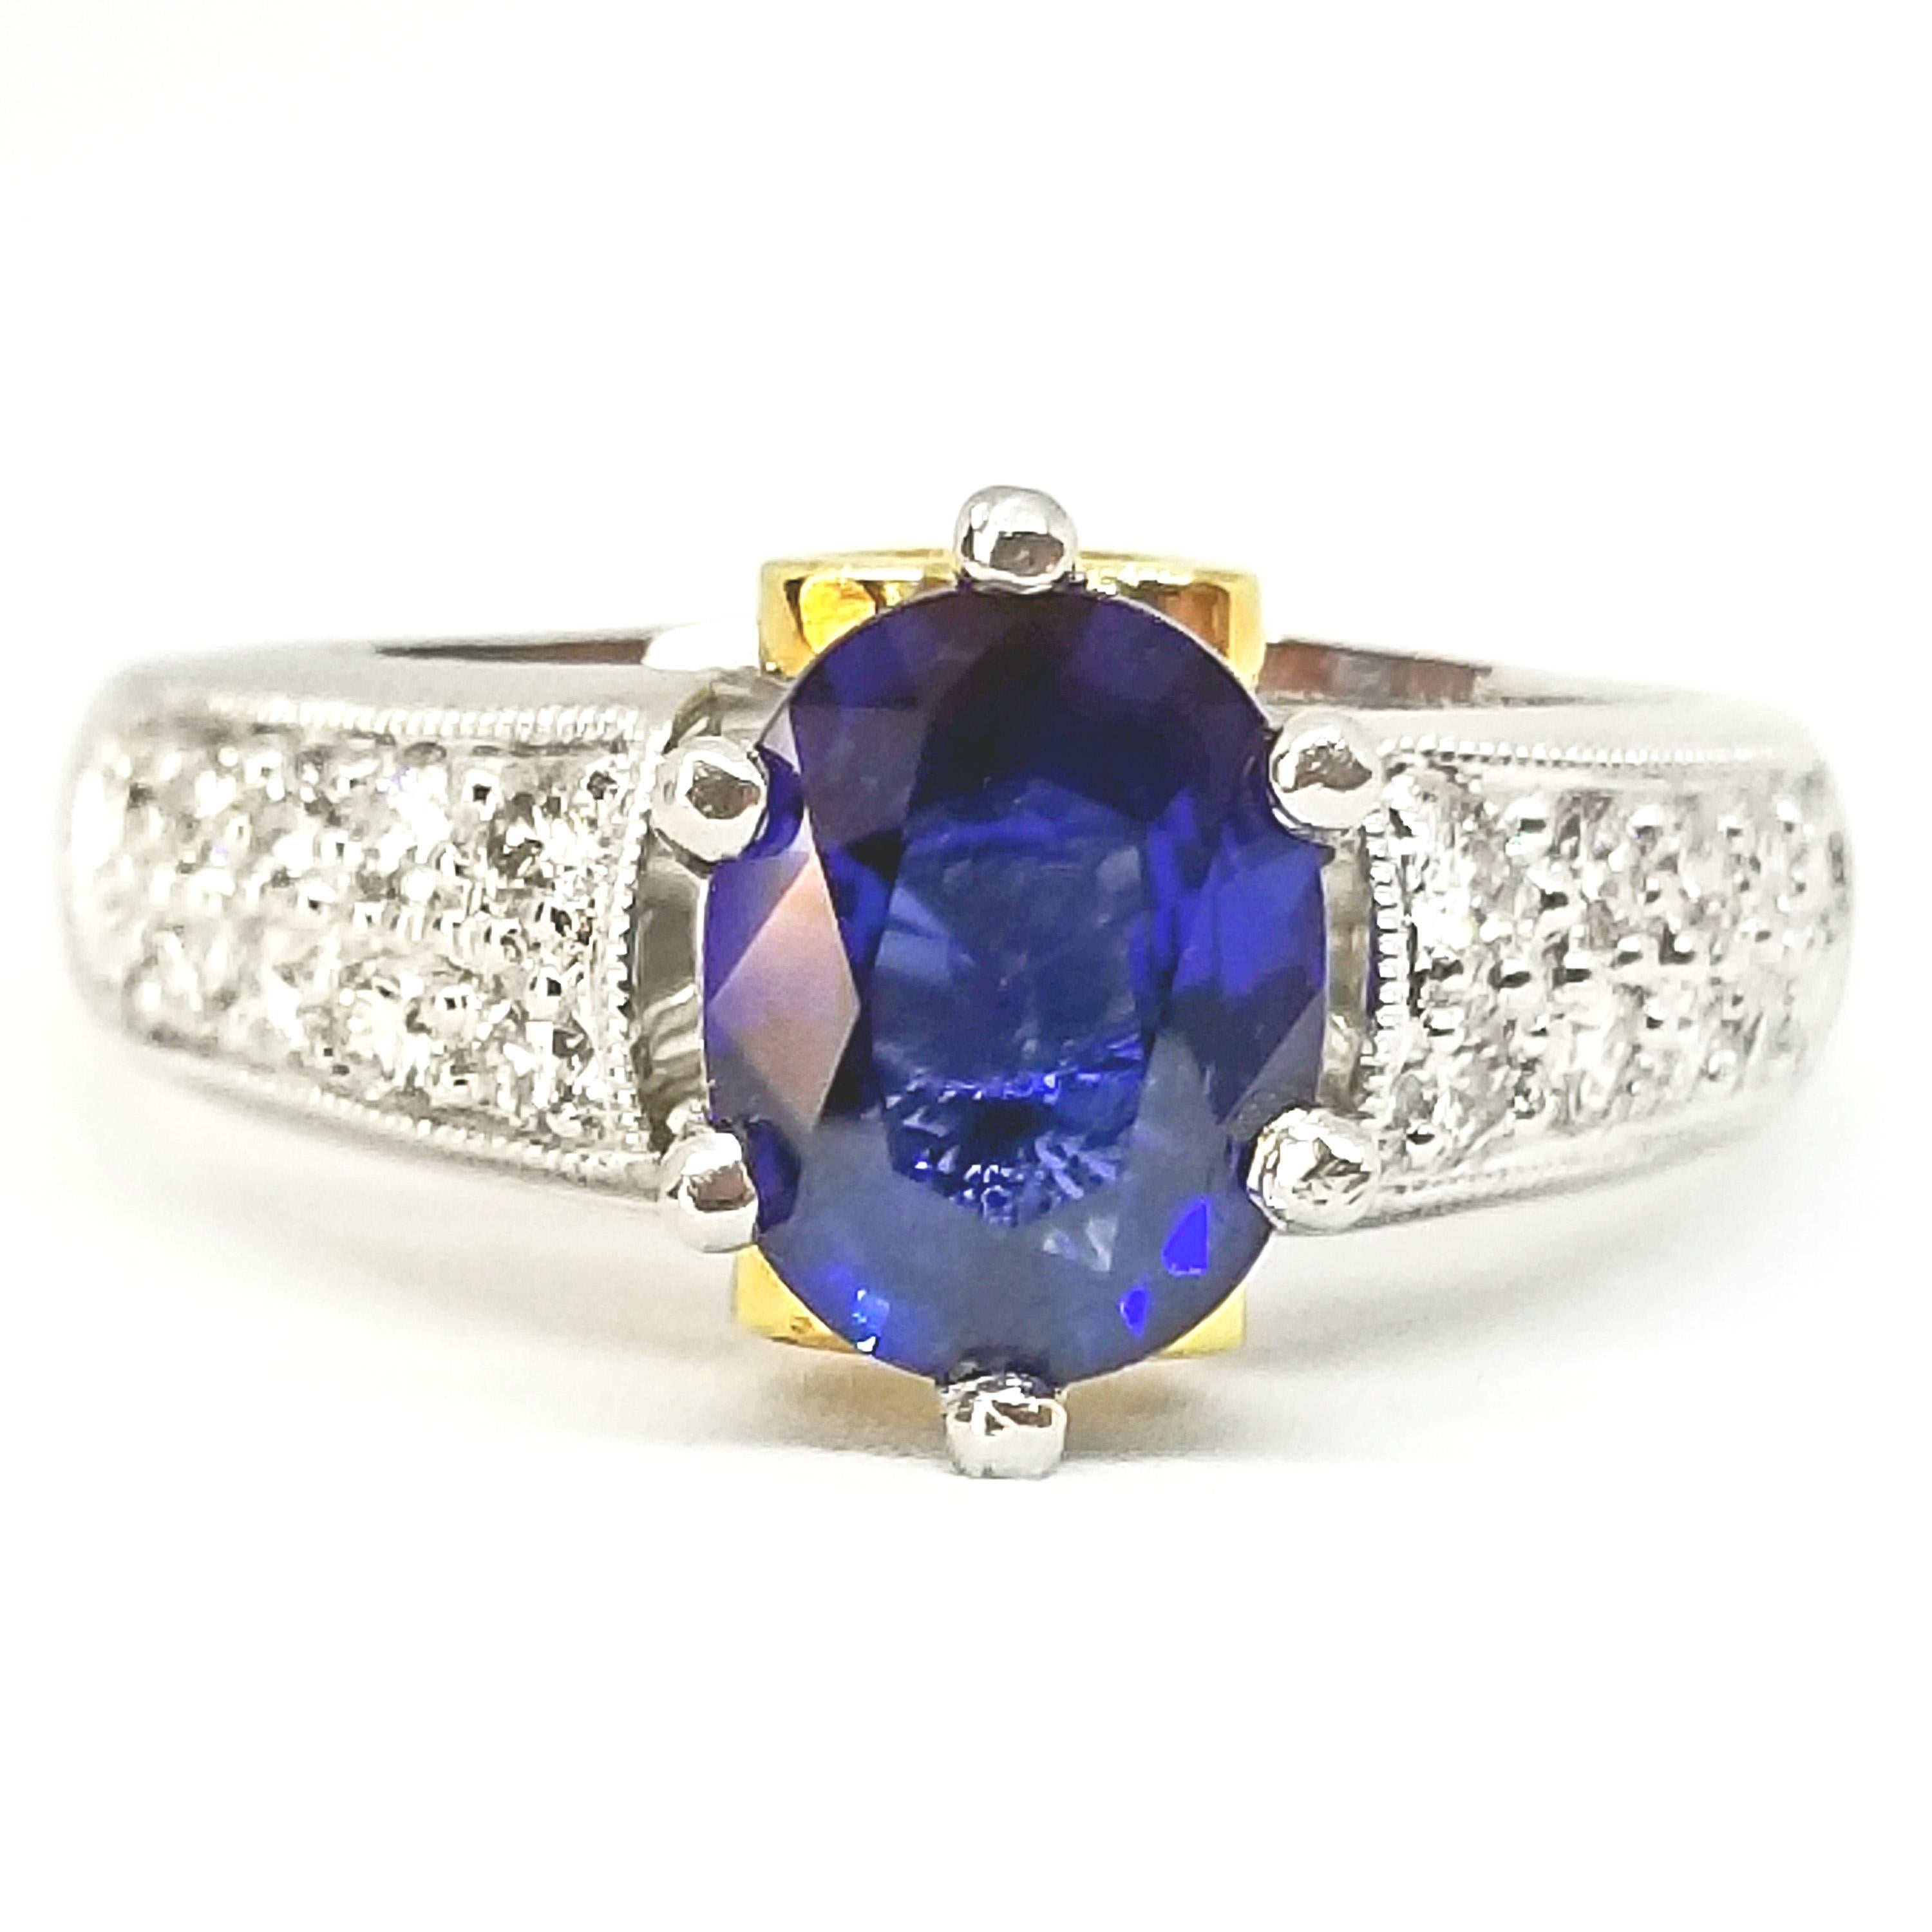 A Contemporary Engagement or Cocktail Ring is set with a 1.48 Carat Oval Brilliant Cut Blue Ceylon Sapphire of Medium Blue Hue and Fine Gem Quality. The stone is prong set in a Diamond Mounting Crafted in Platinum with 18K Yellow accents. The